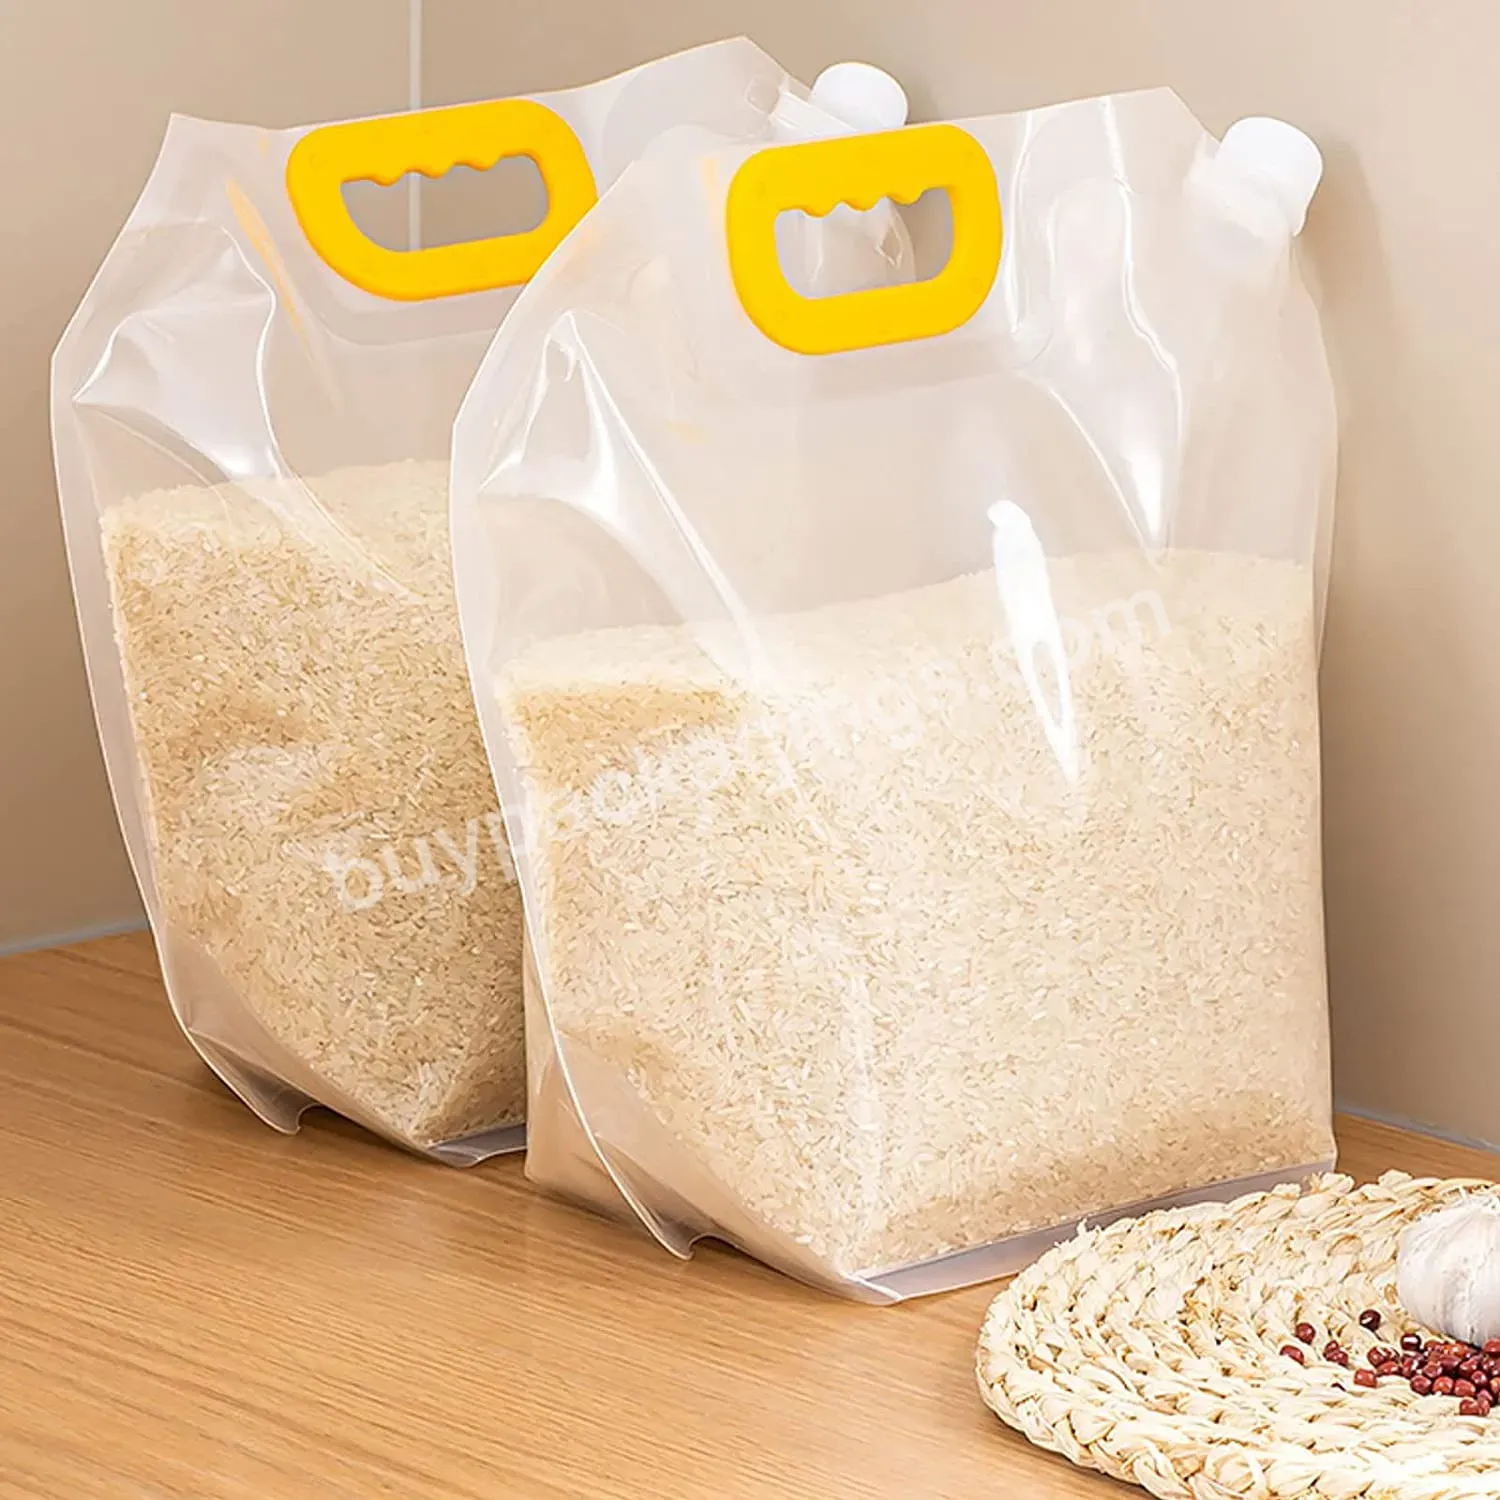 Custom Portable Drinking Containers Packaging Spout Pouch Grain Storage Suction Bags 5 Kg Rice Packing Bag With Nozzle - Buy 5 Gallon Rice Packing Bag,Transparent Grain Storage Suction Bags With Funnel,Flexible Liquid Packs Plastic Stand Up Spout Pou